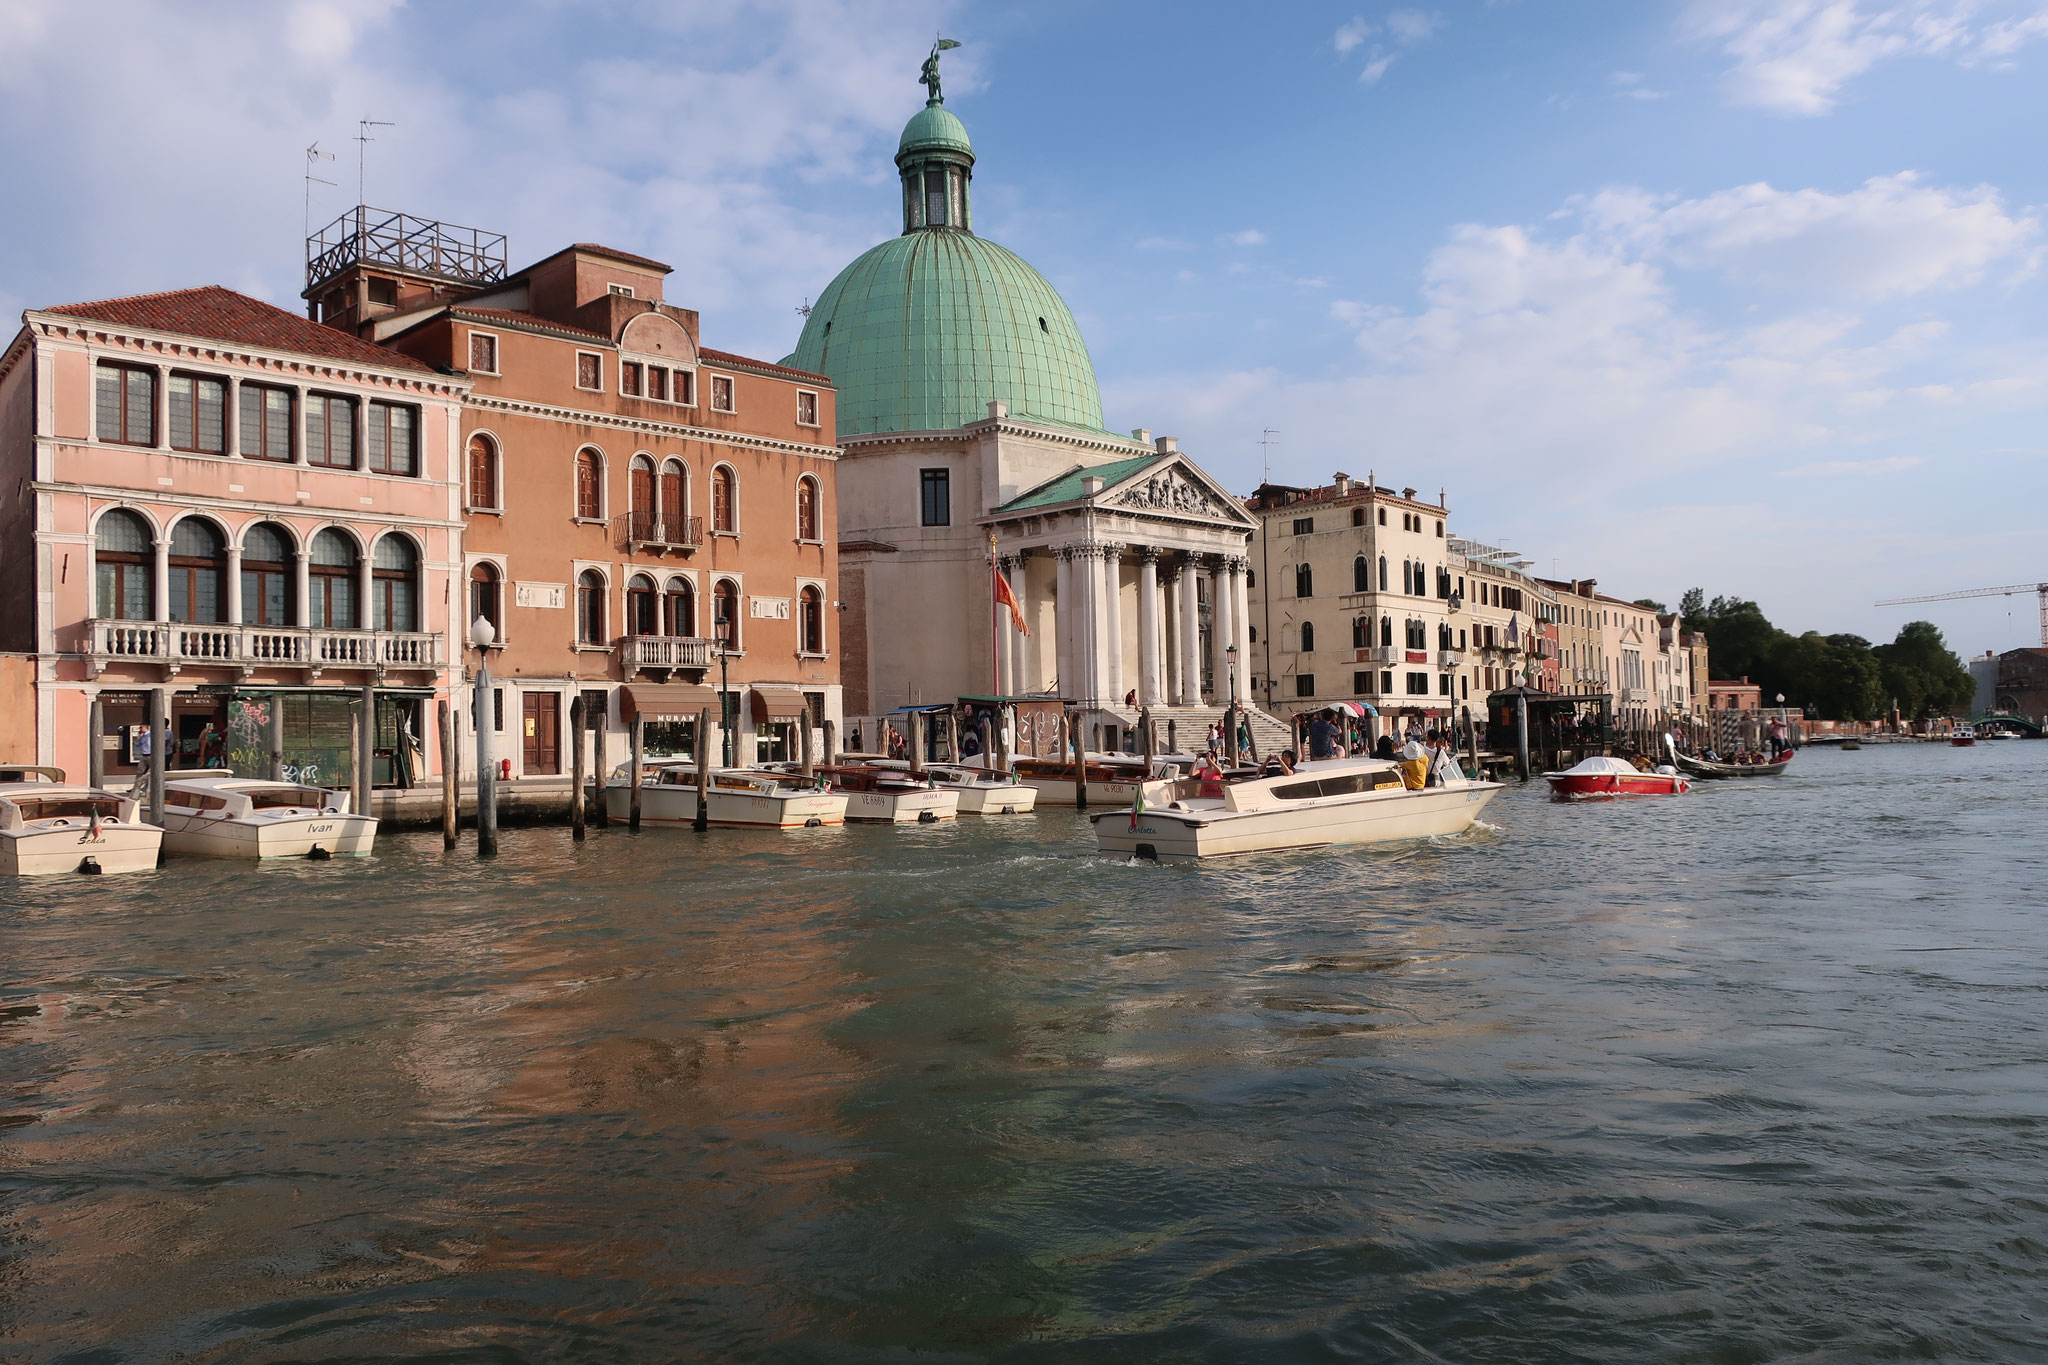 The cityscape of Venice built on the tidal flats